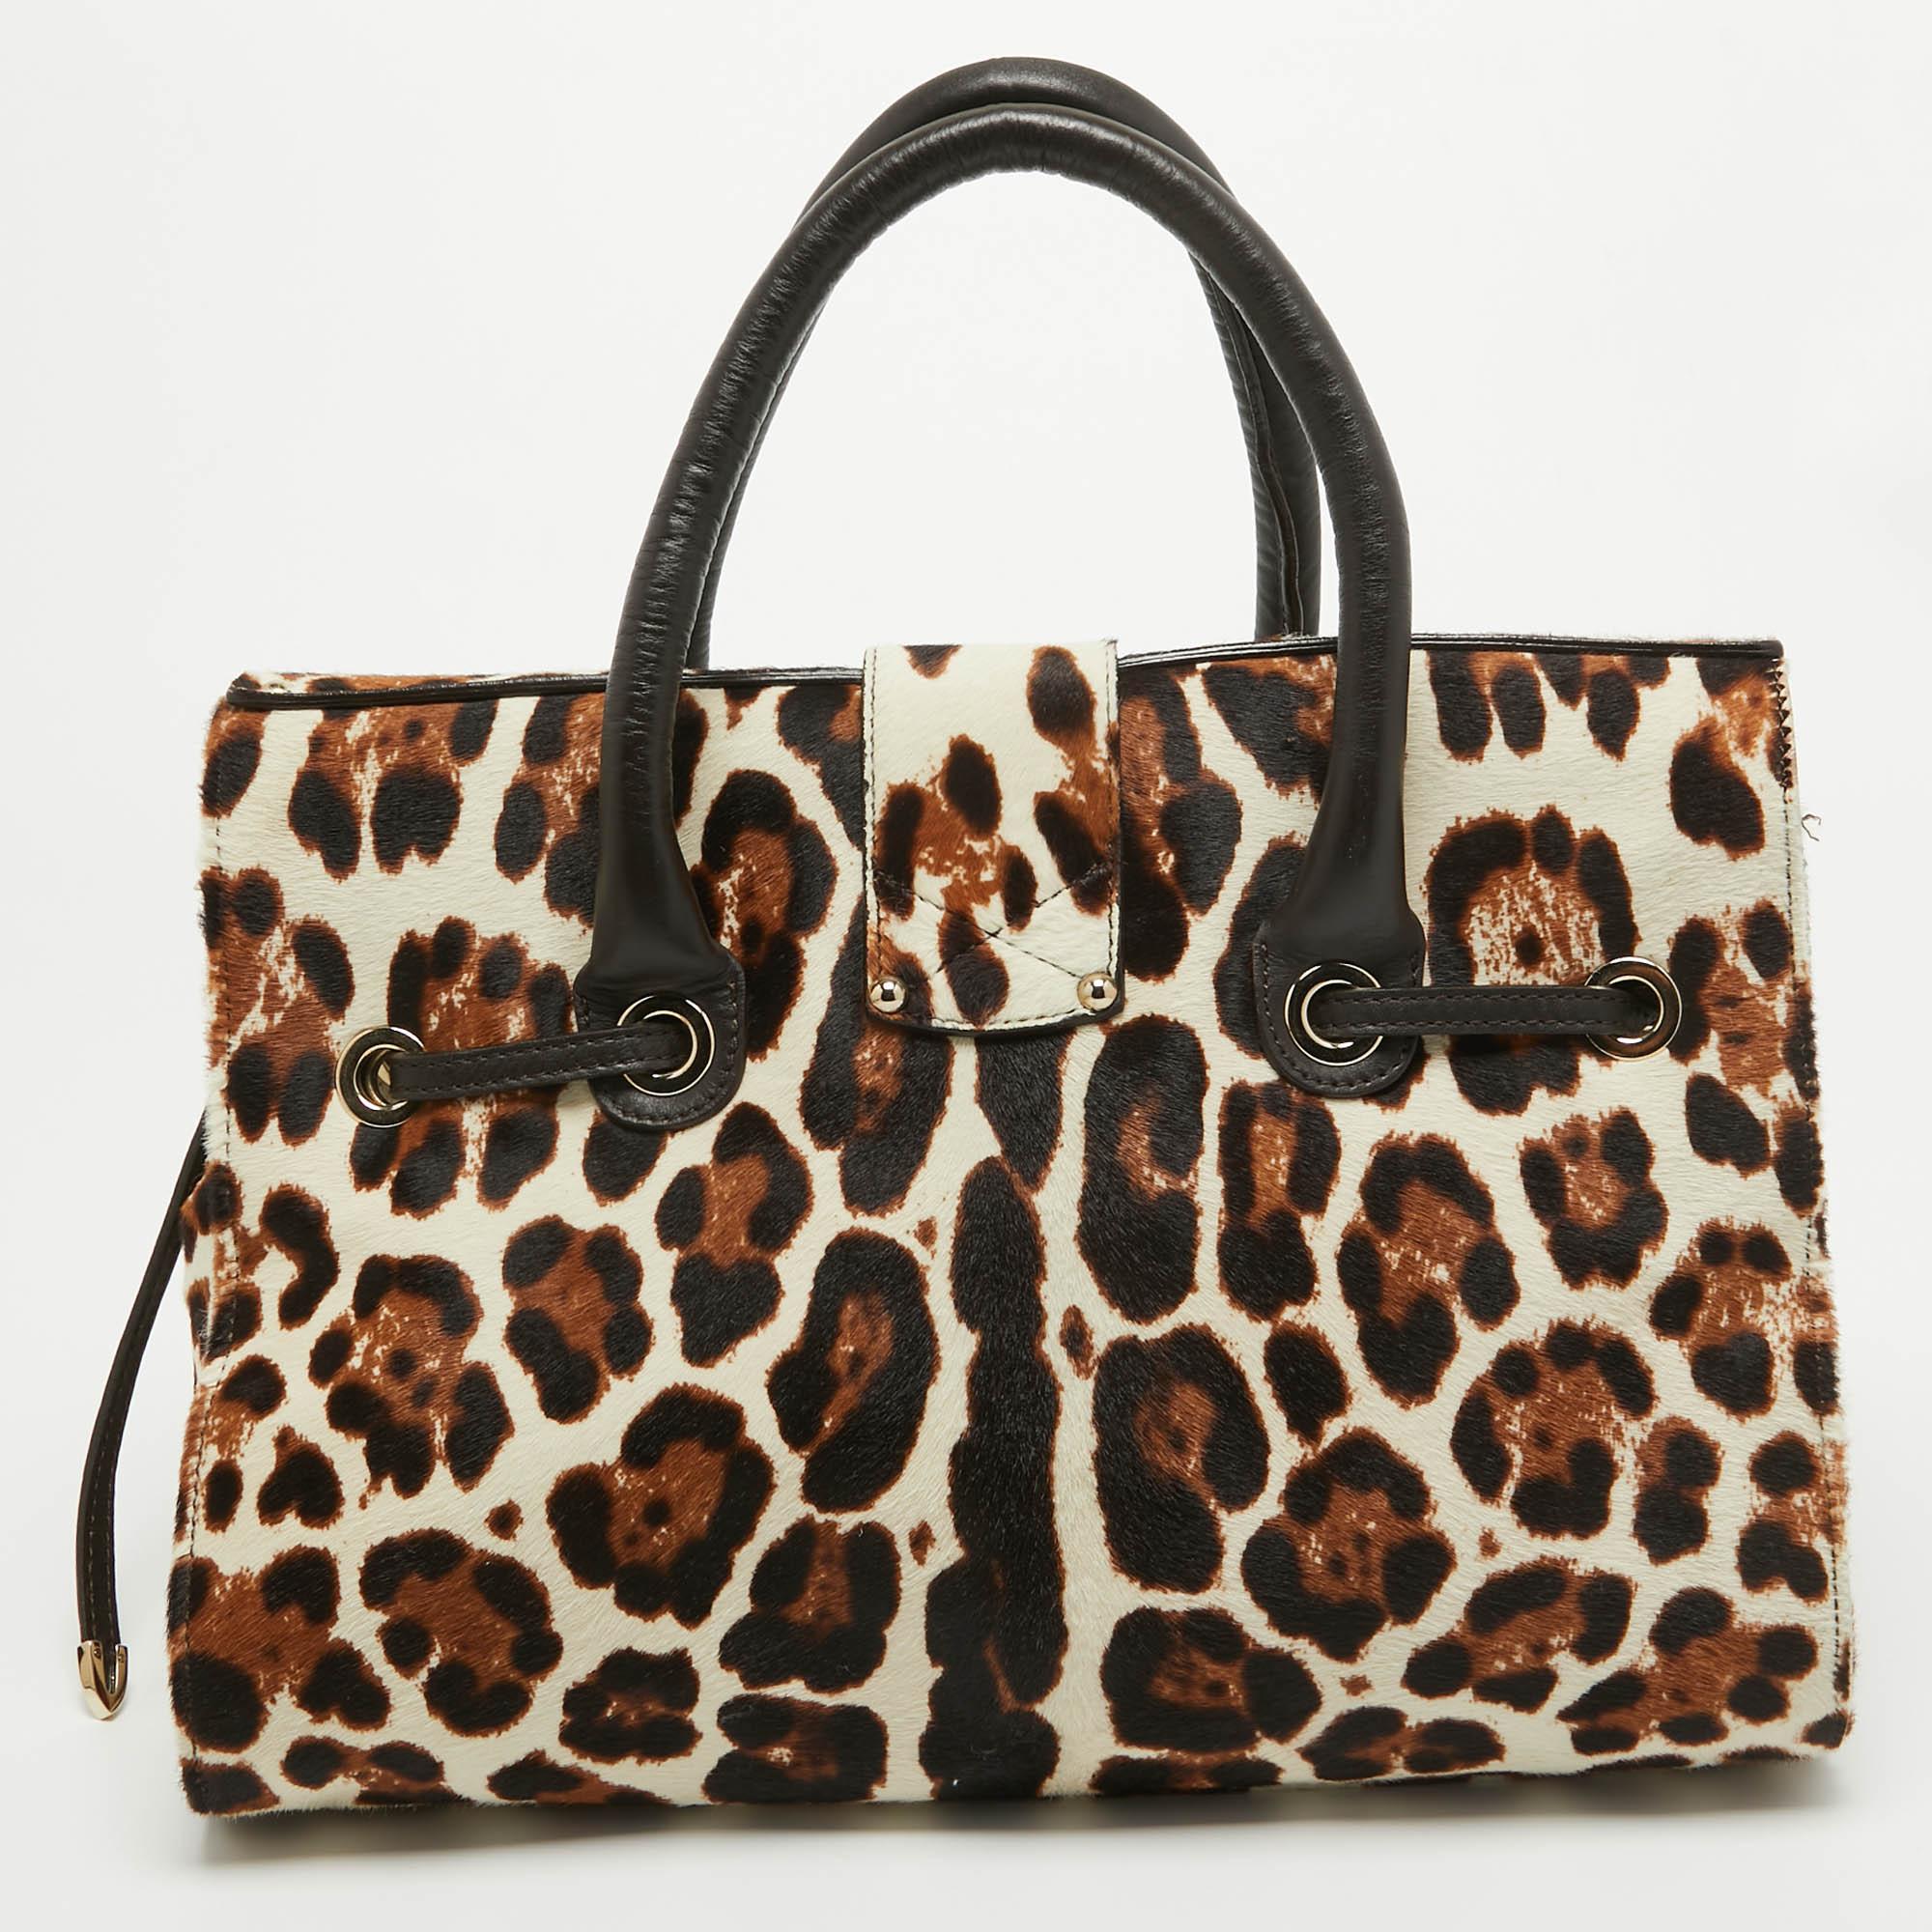 Made from leopard-print calf hair and leather, this bag from Jimmy Choo is reliable and packed with style. It comes with a flip lock on the flap, a belt strap looped around it, and a well-sized Alcantara interior, whilst being held by two handles.